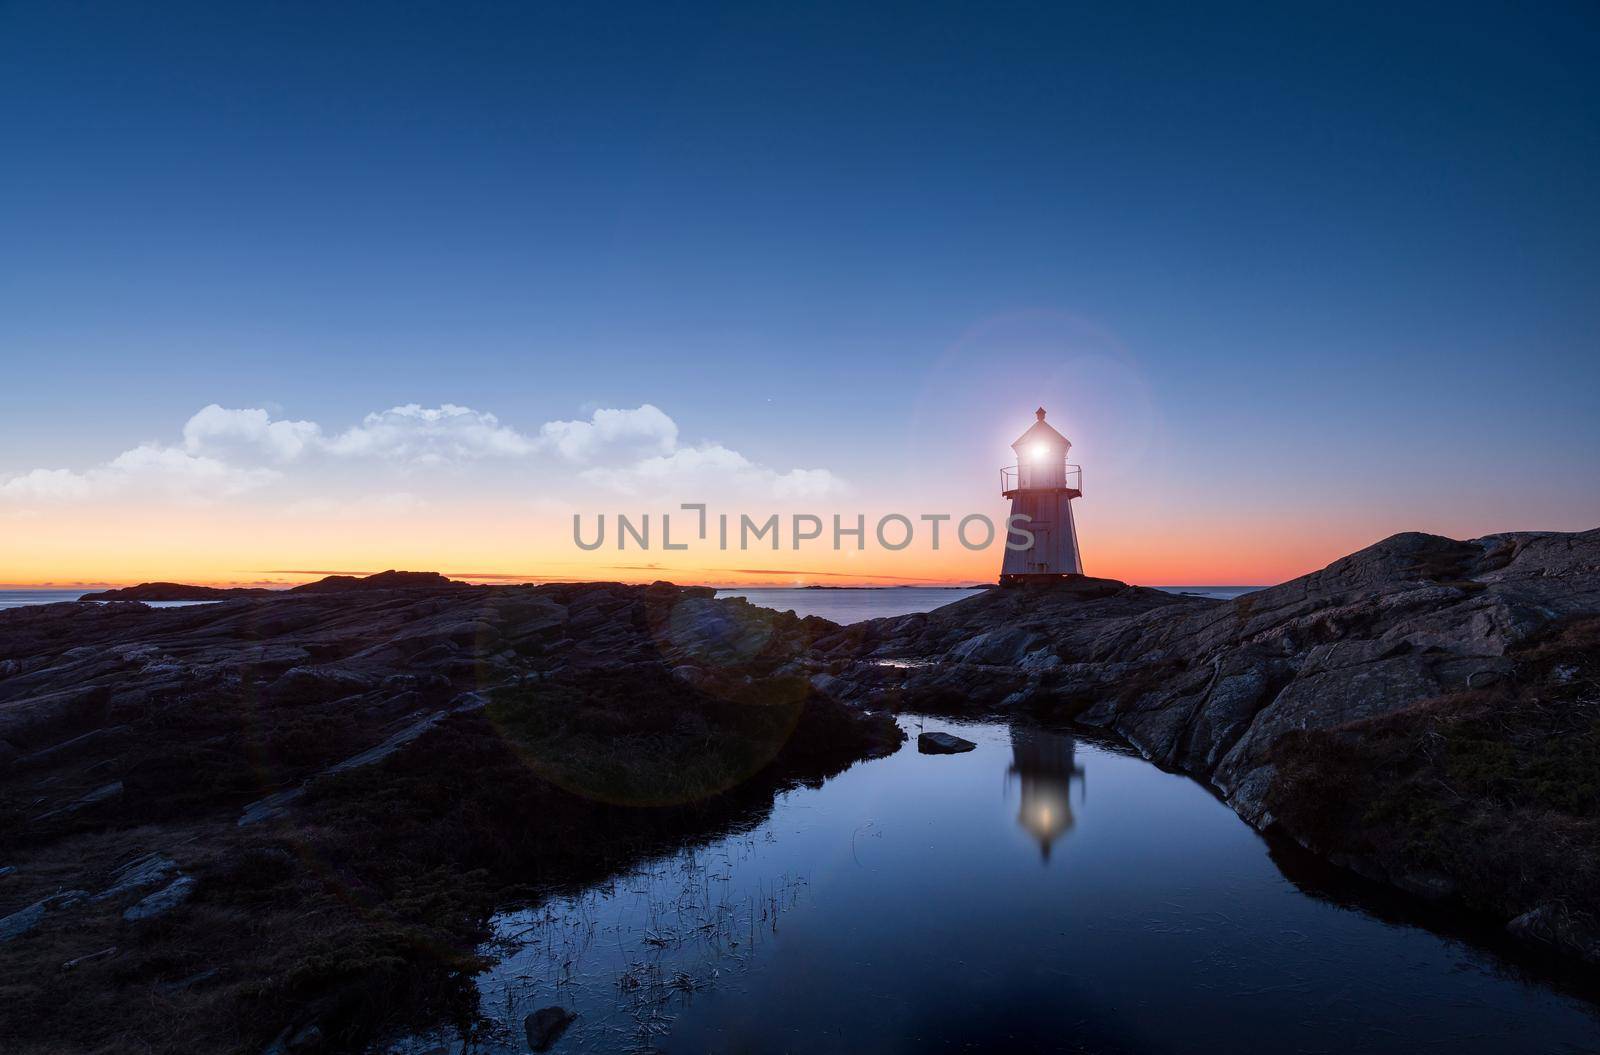 Lighthouse surrounded by rocks at night, lighthouse with lights on at sunset